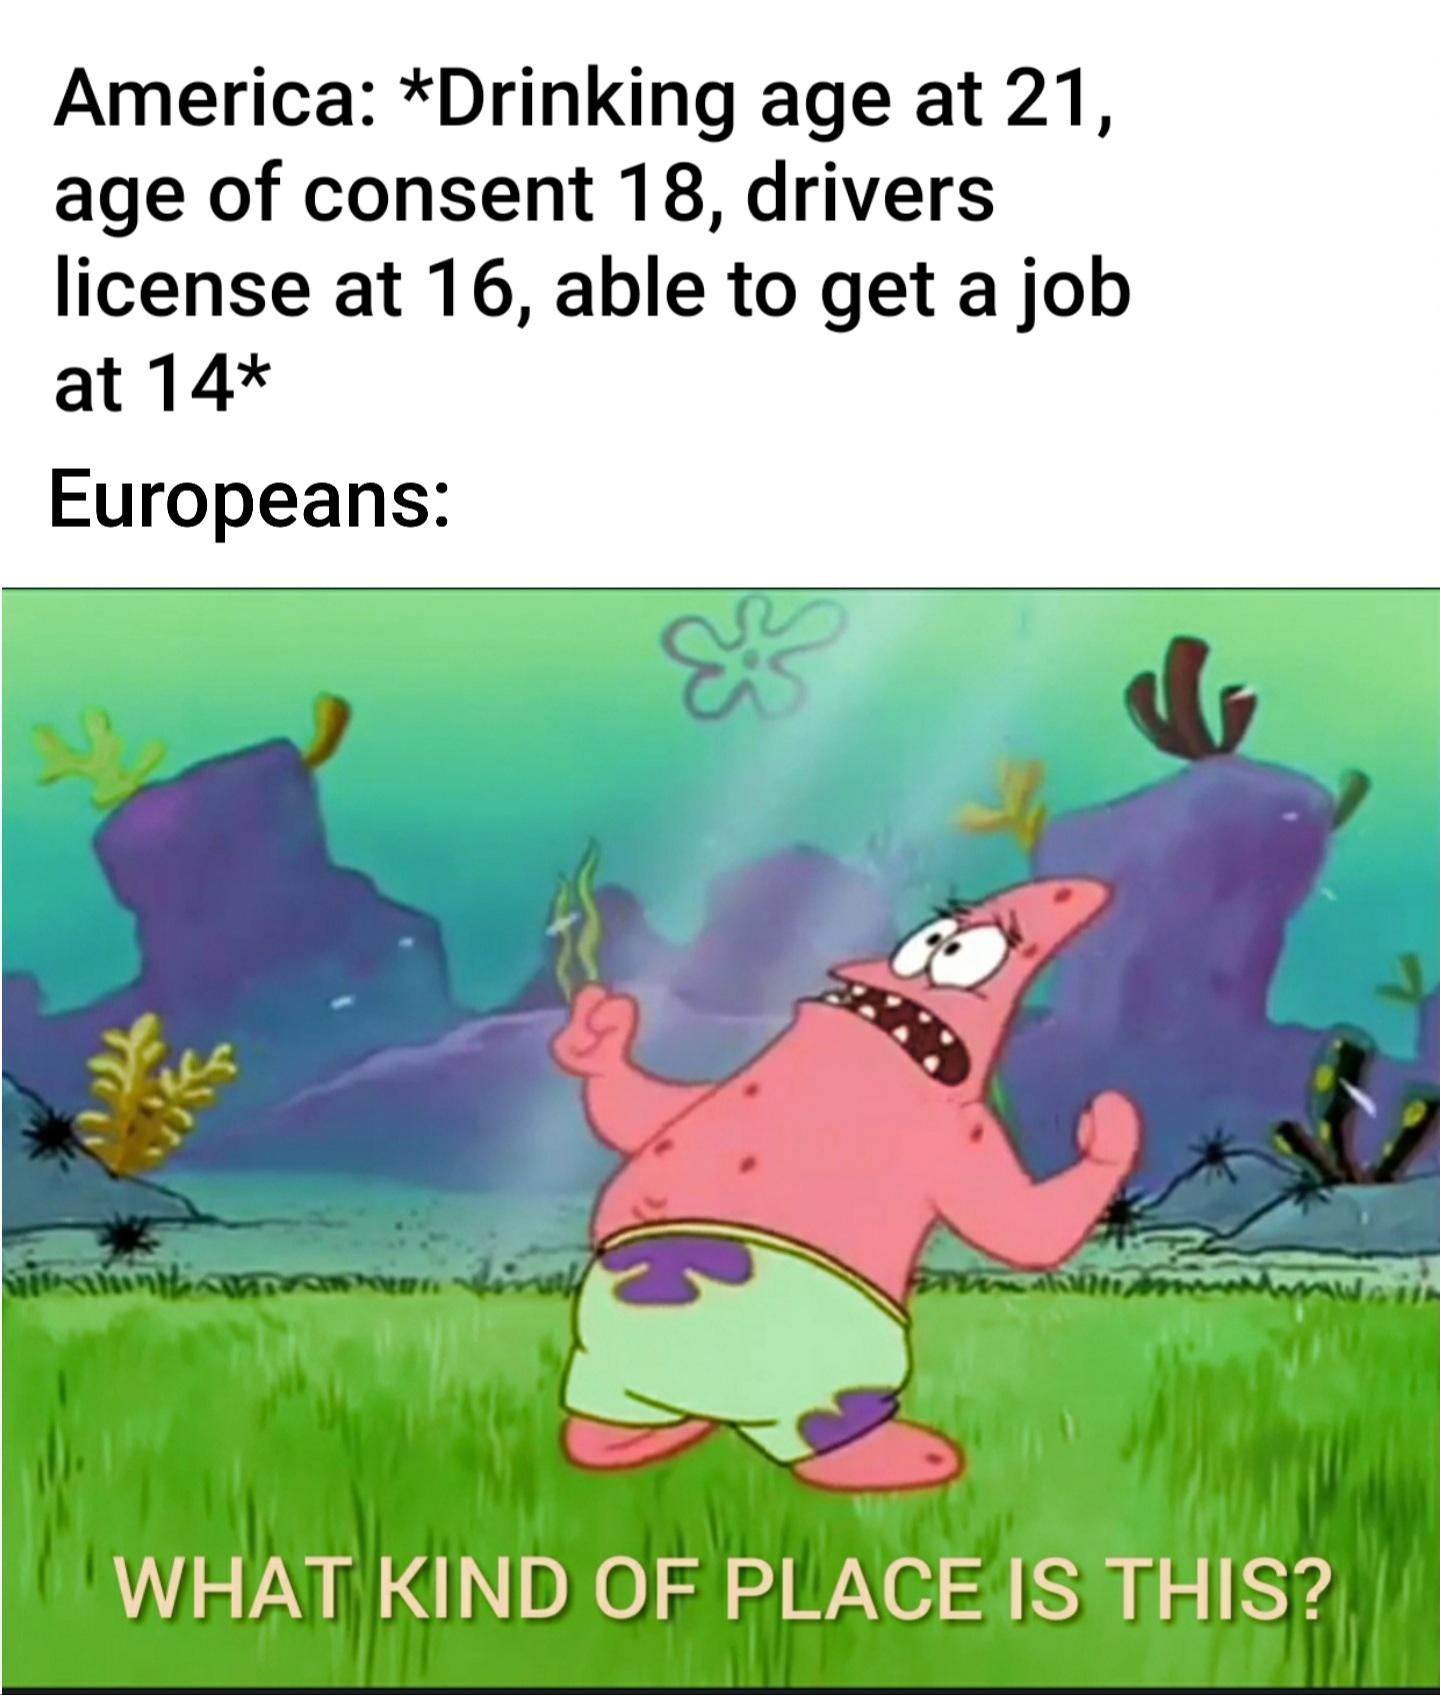 Funny, America, Germany, Europe, California, American other memes Funny, America, Germany, Europe, California, American text: America: *Drinking age at 21, age of consent 1 8, drivers license at 16, able to get a job at 14* Europeans: KIND OF PLACE IS THIS?J 